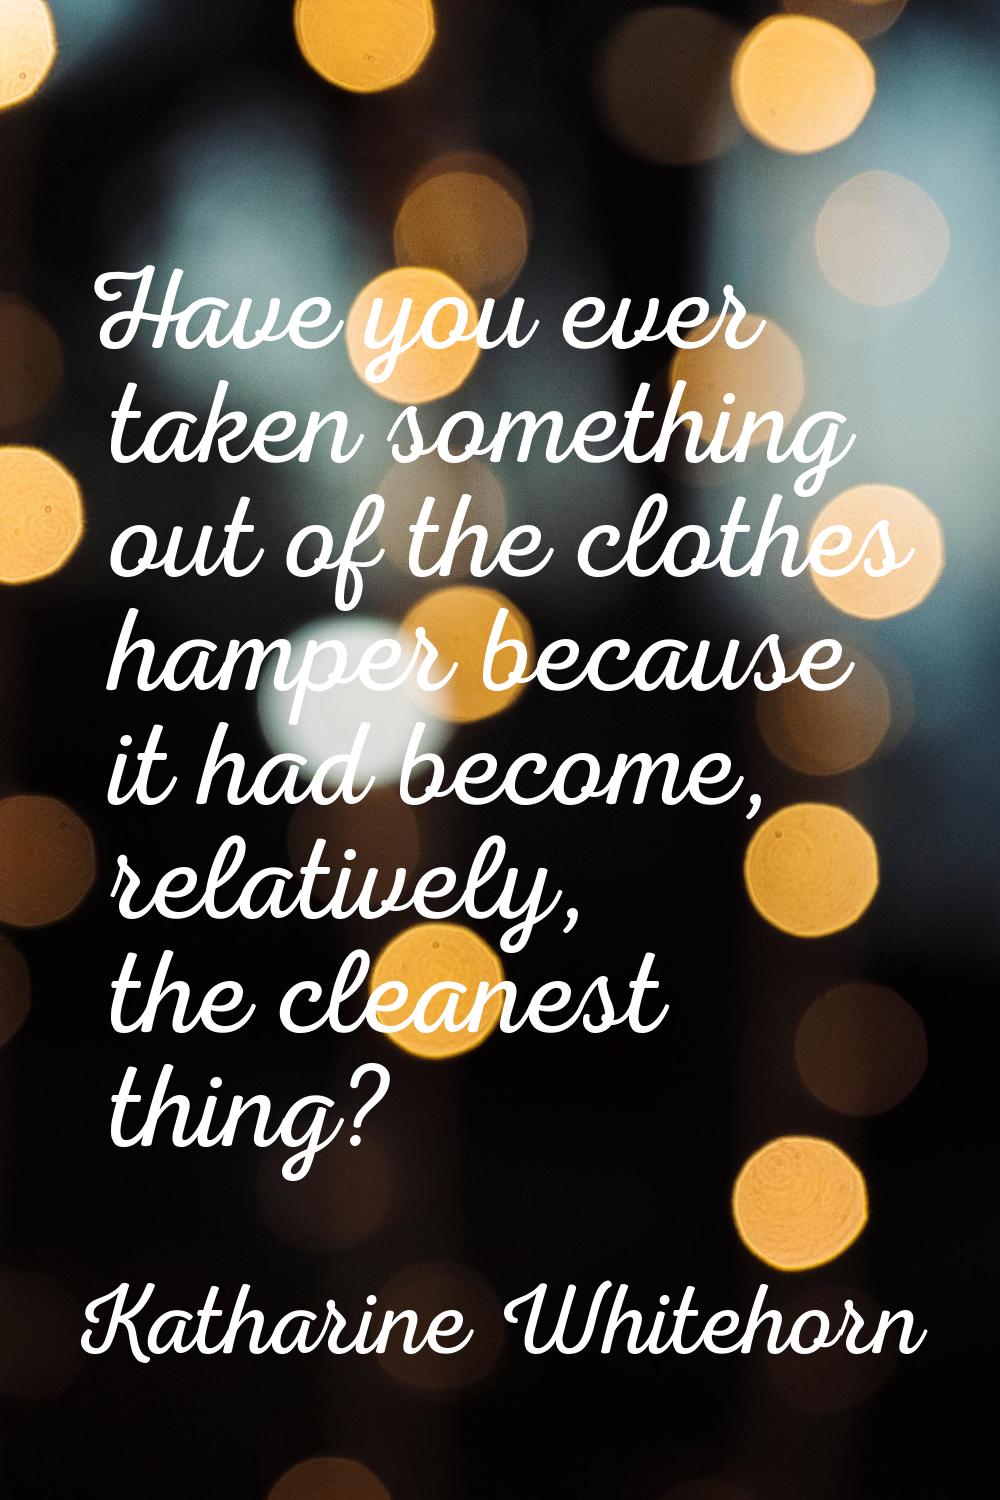 Have you ever taken something out of the clothes hamper because it had become, relatively, the clea